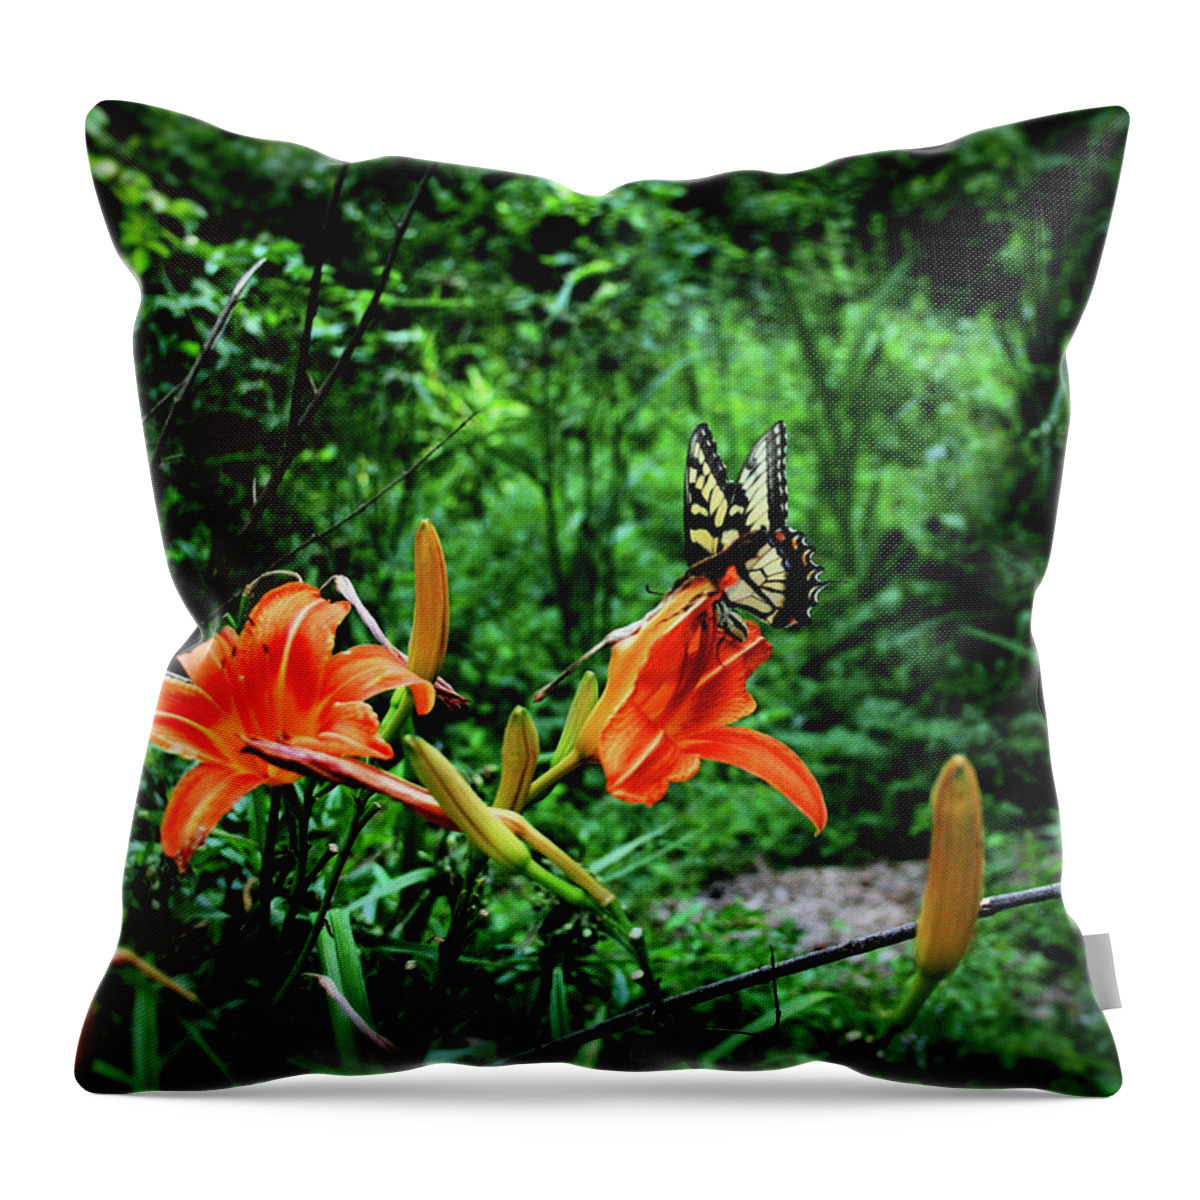 Butterfly Throw Pillow featuring the photograph Butterfly and Canna Lilies by Cathy Harper